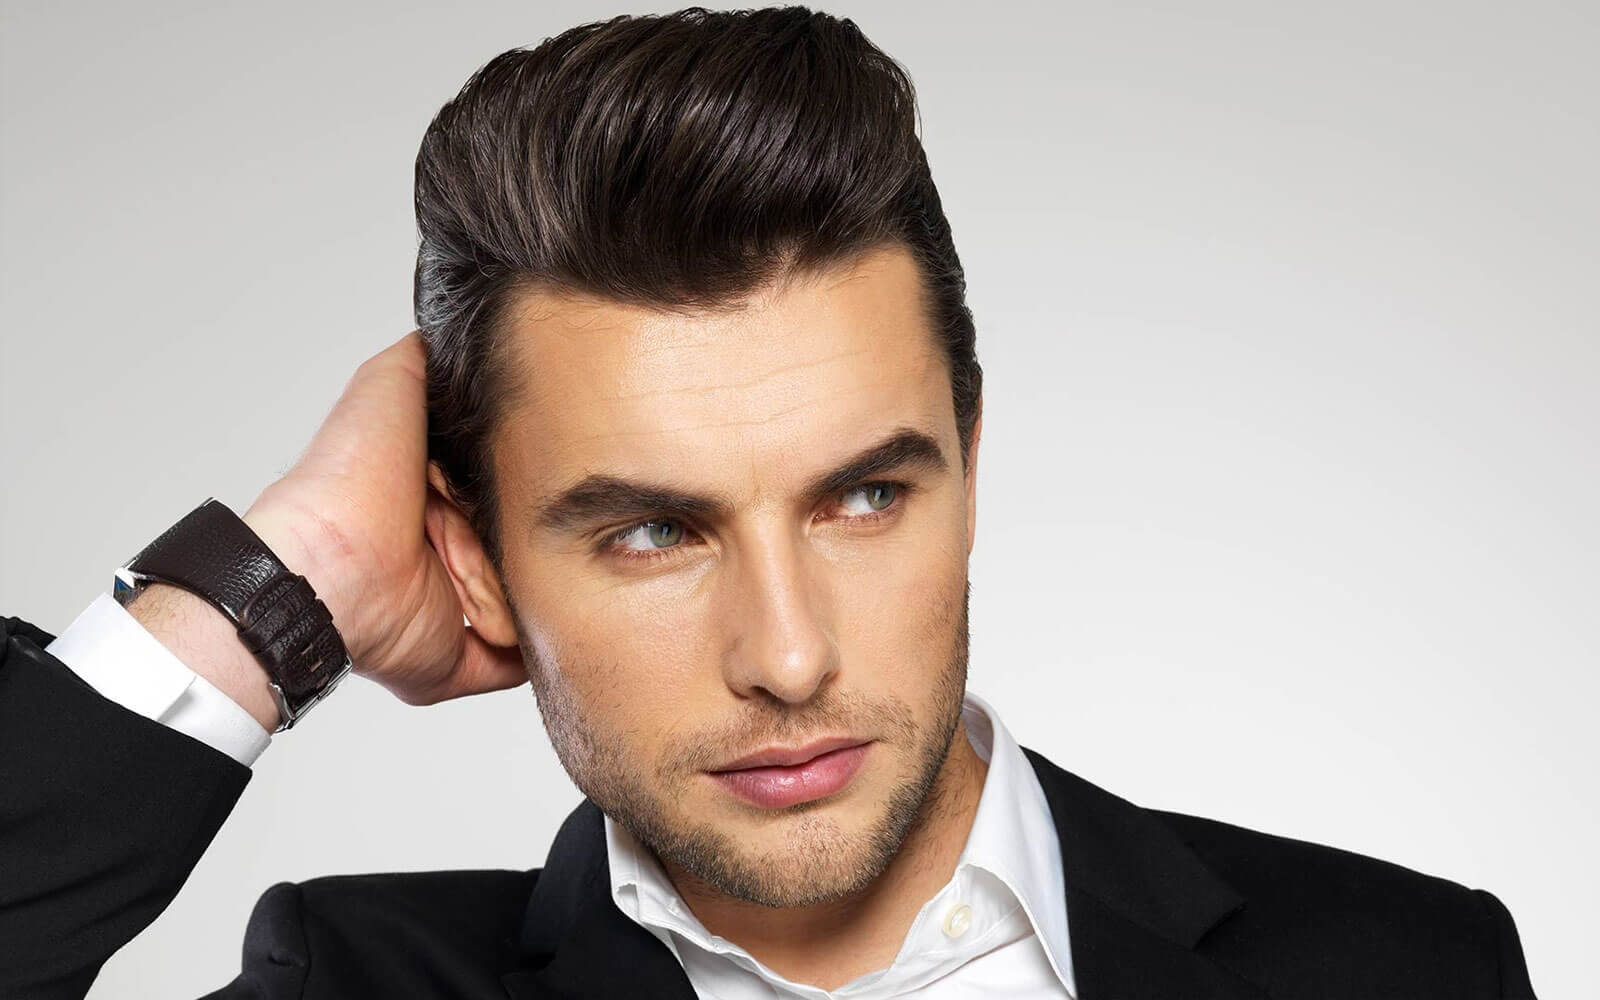 A Complete Guide to Hair Products for Men - The GentleManual